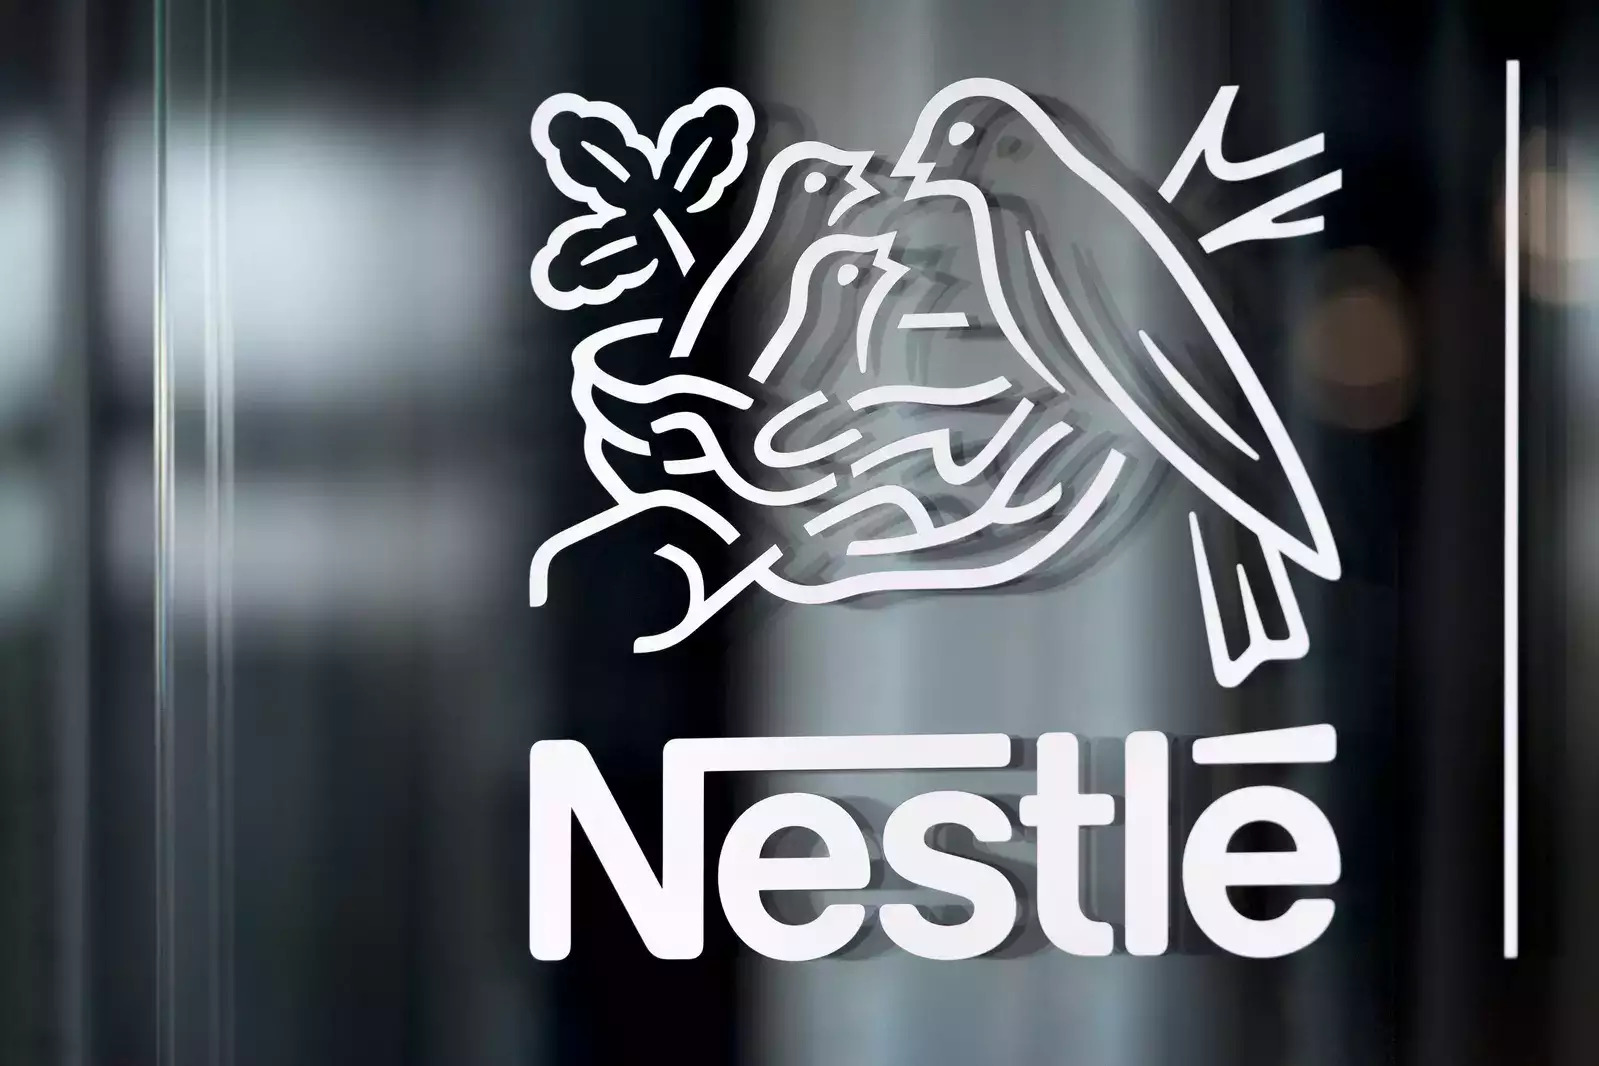 Nestle India, A Leader in Consumer Packaged Goods, was Inaugurated on Wednesday.